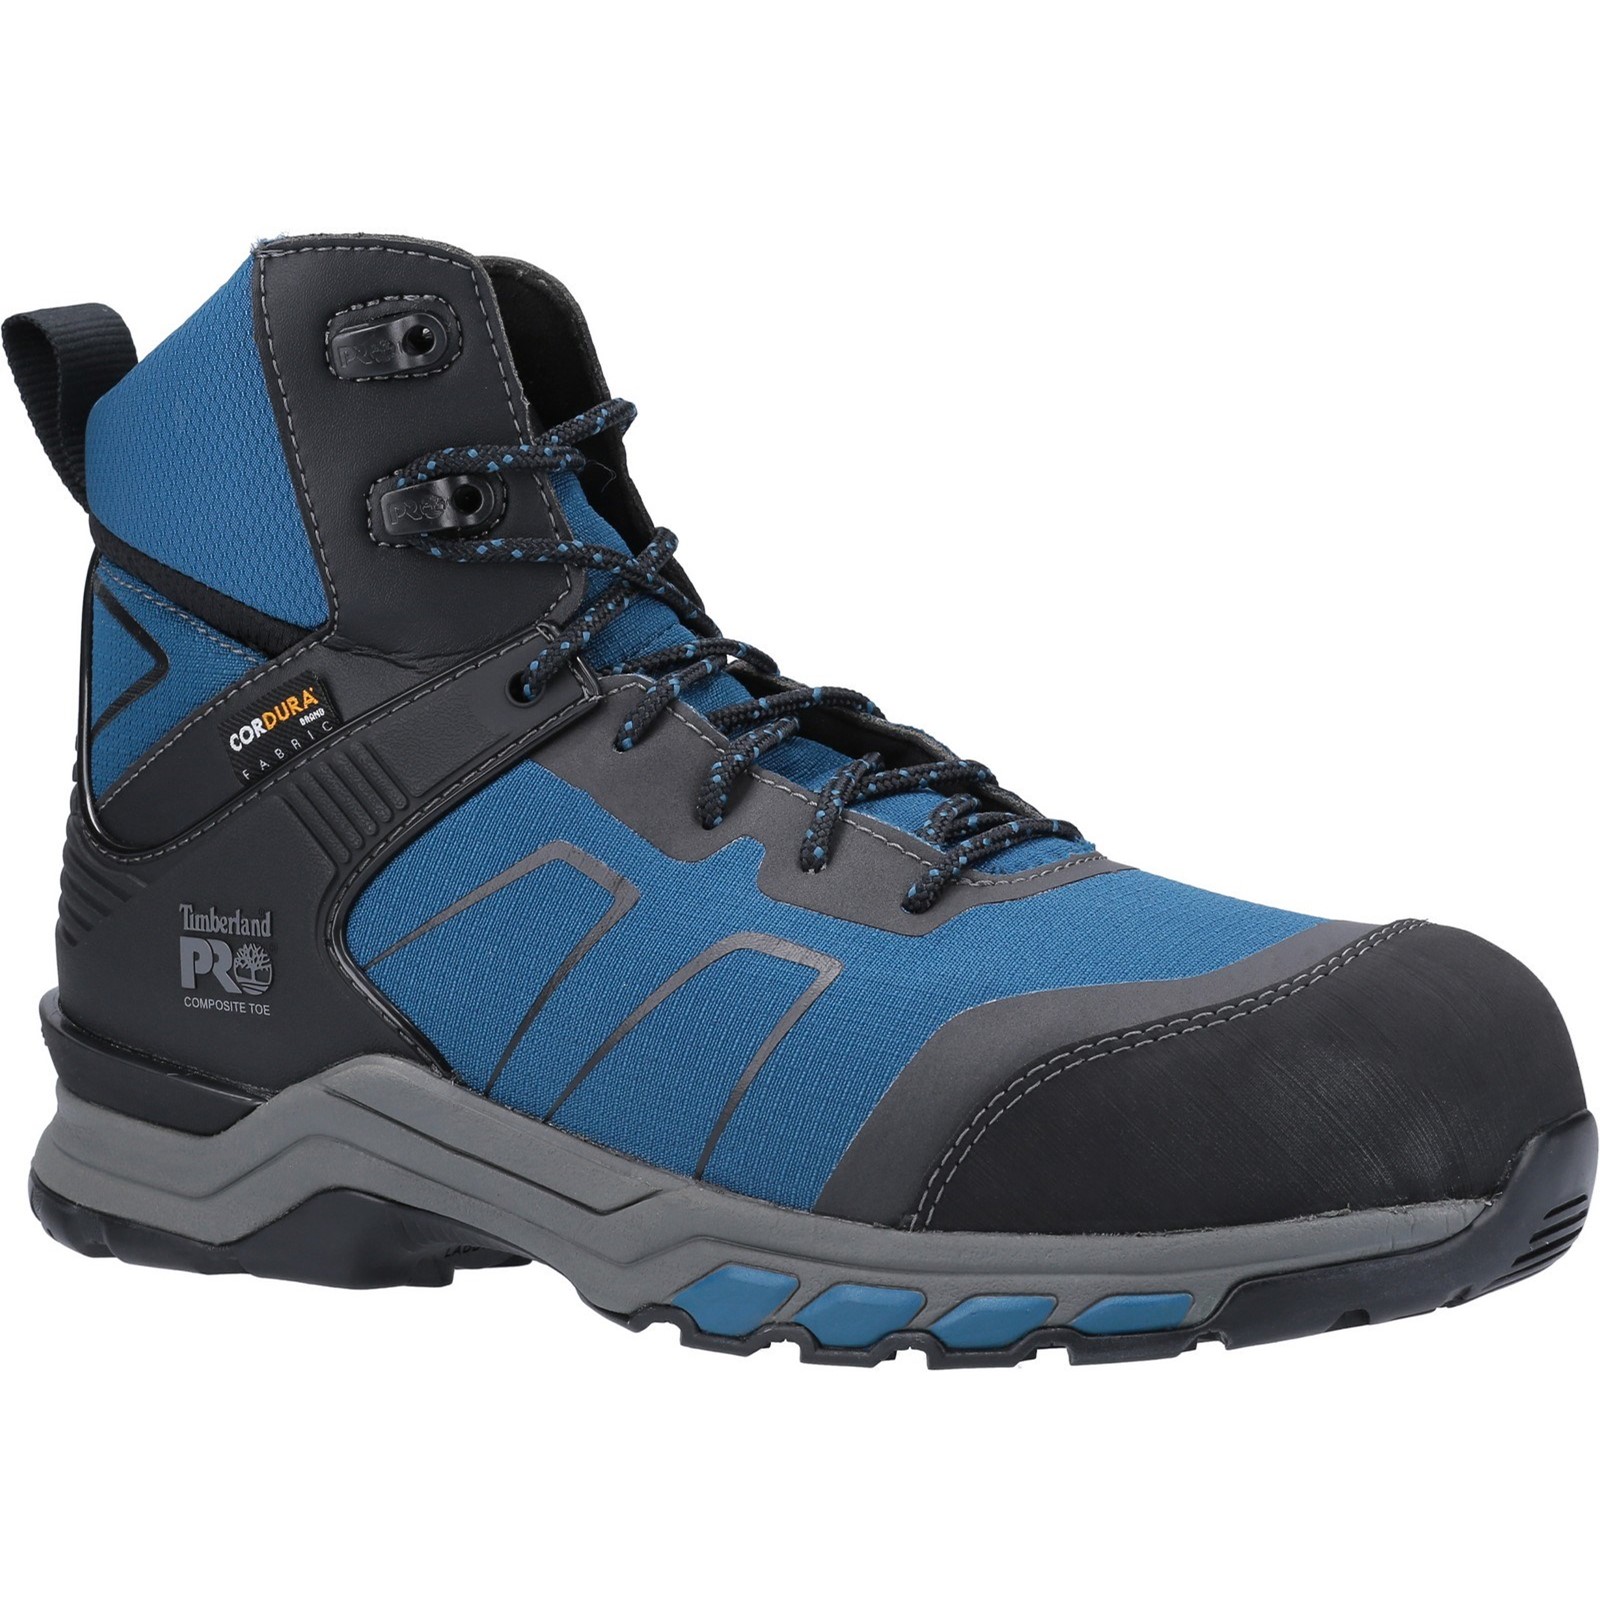 Hypercharge Composite Safety Toe Work Boot Textile Teal/Black